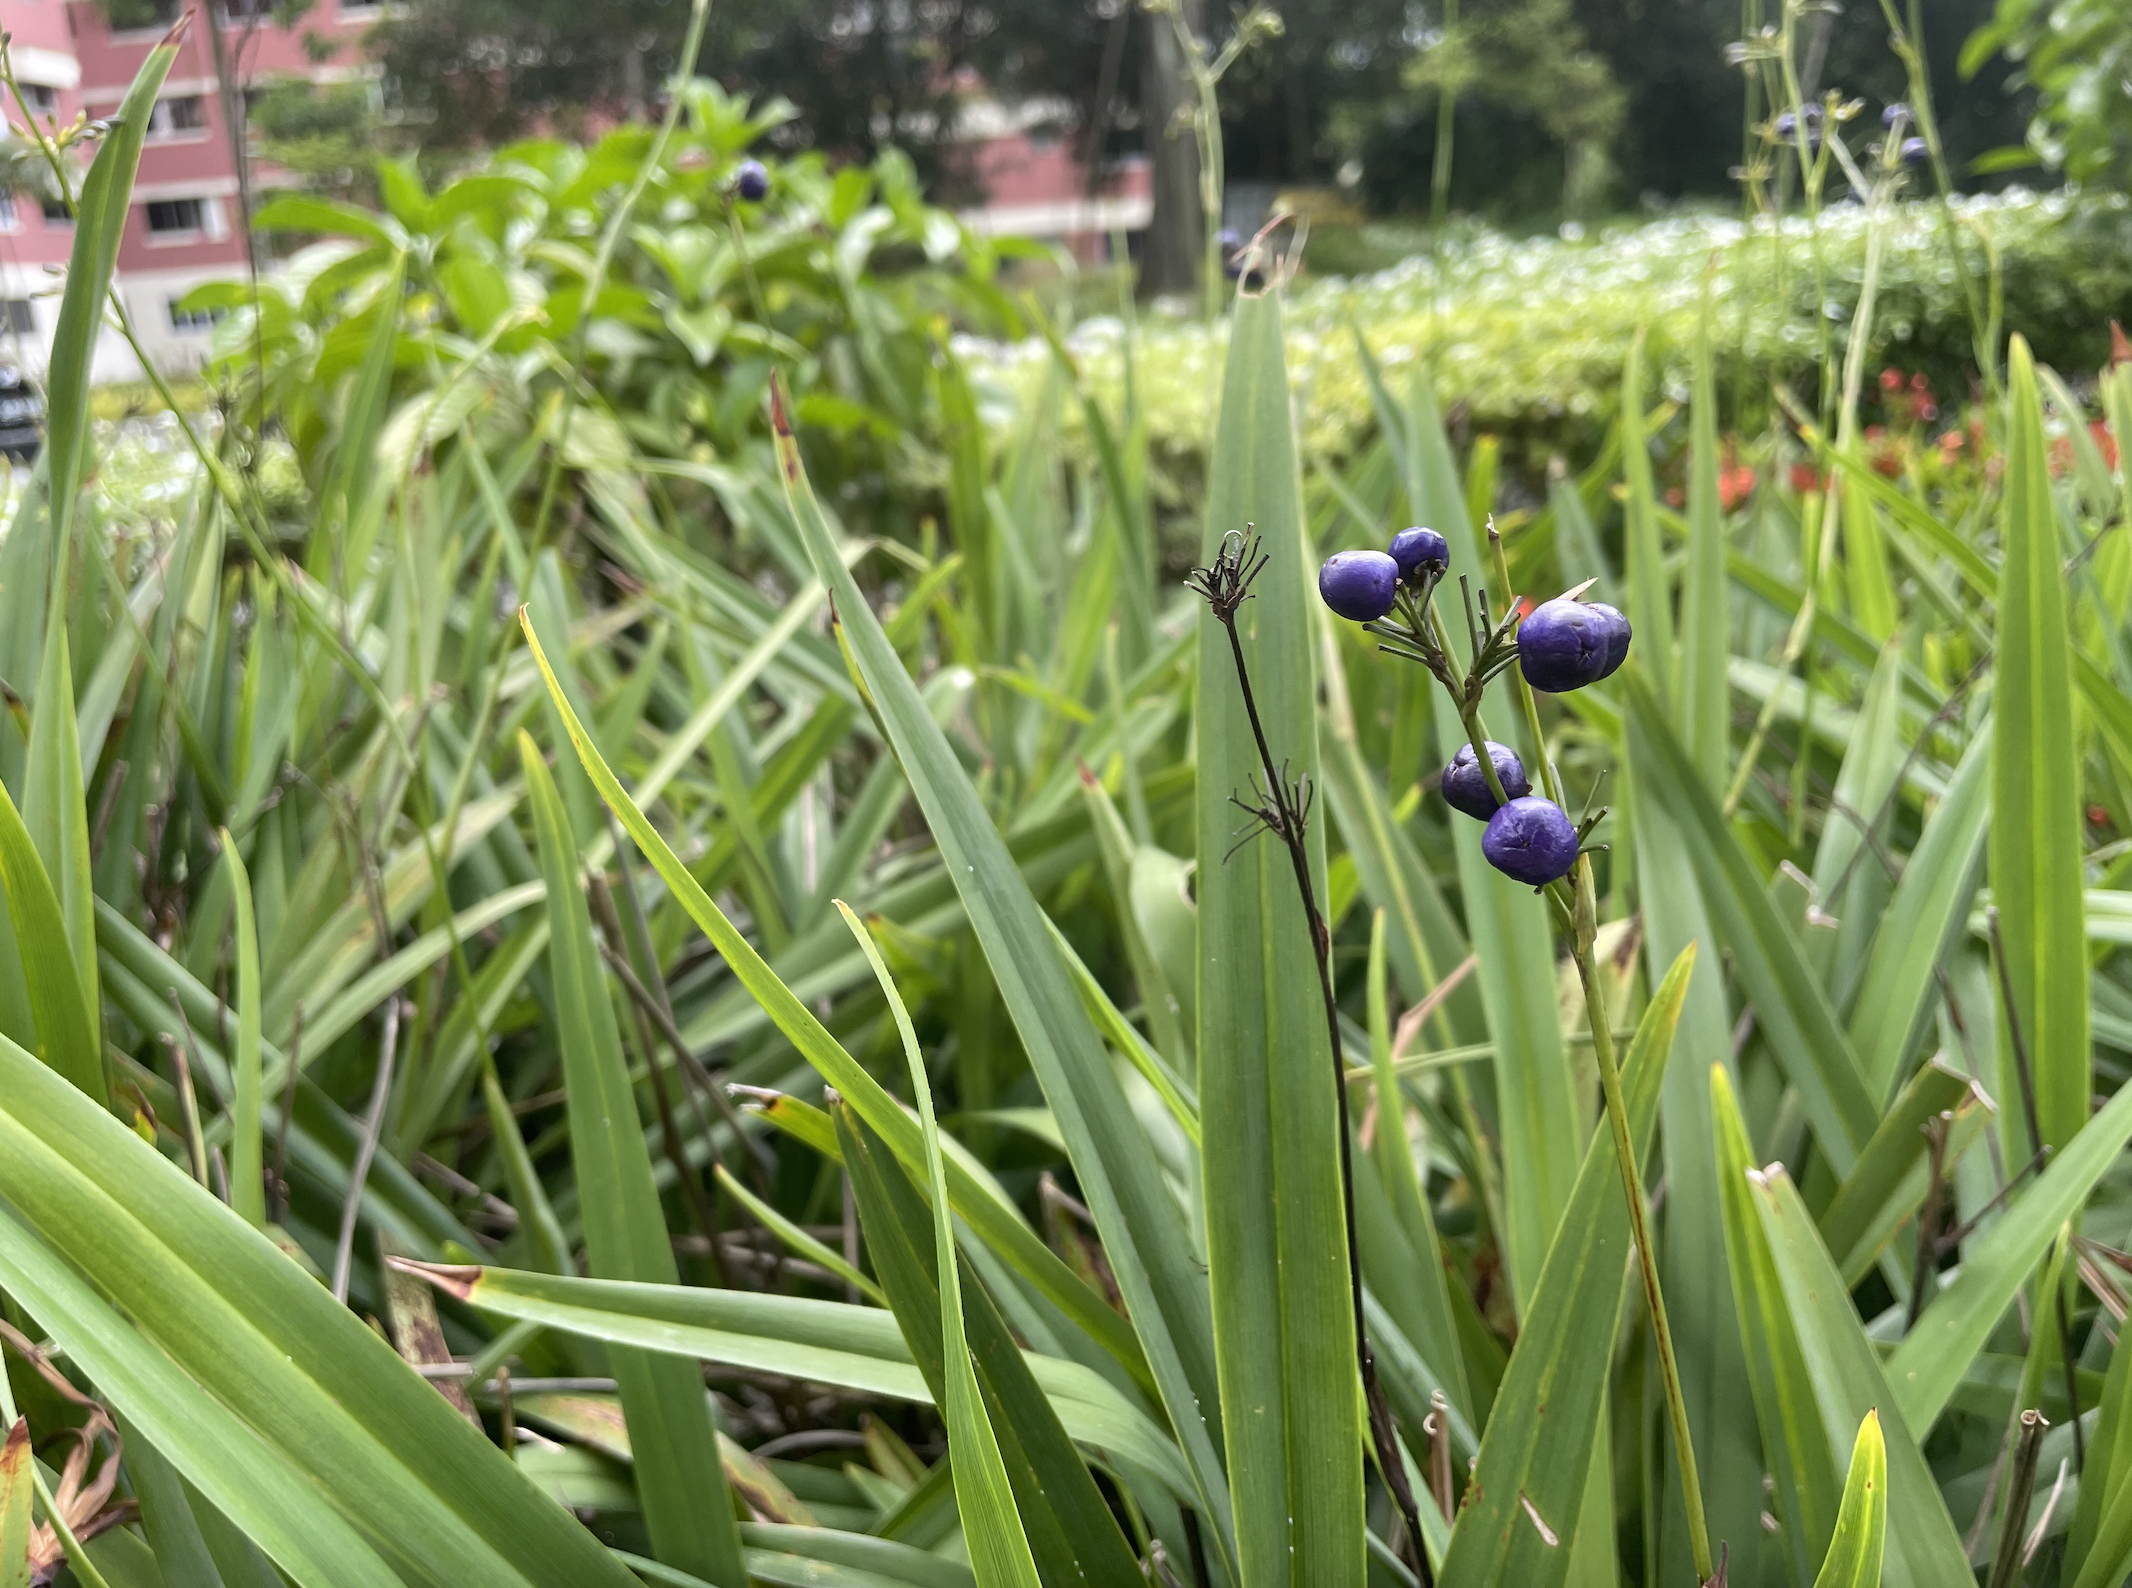 A photo of green blades of grass and leaves, with a stalk in the foreground with some bright purple buds.